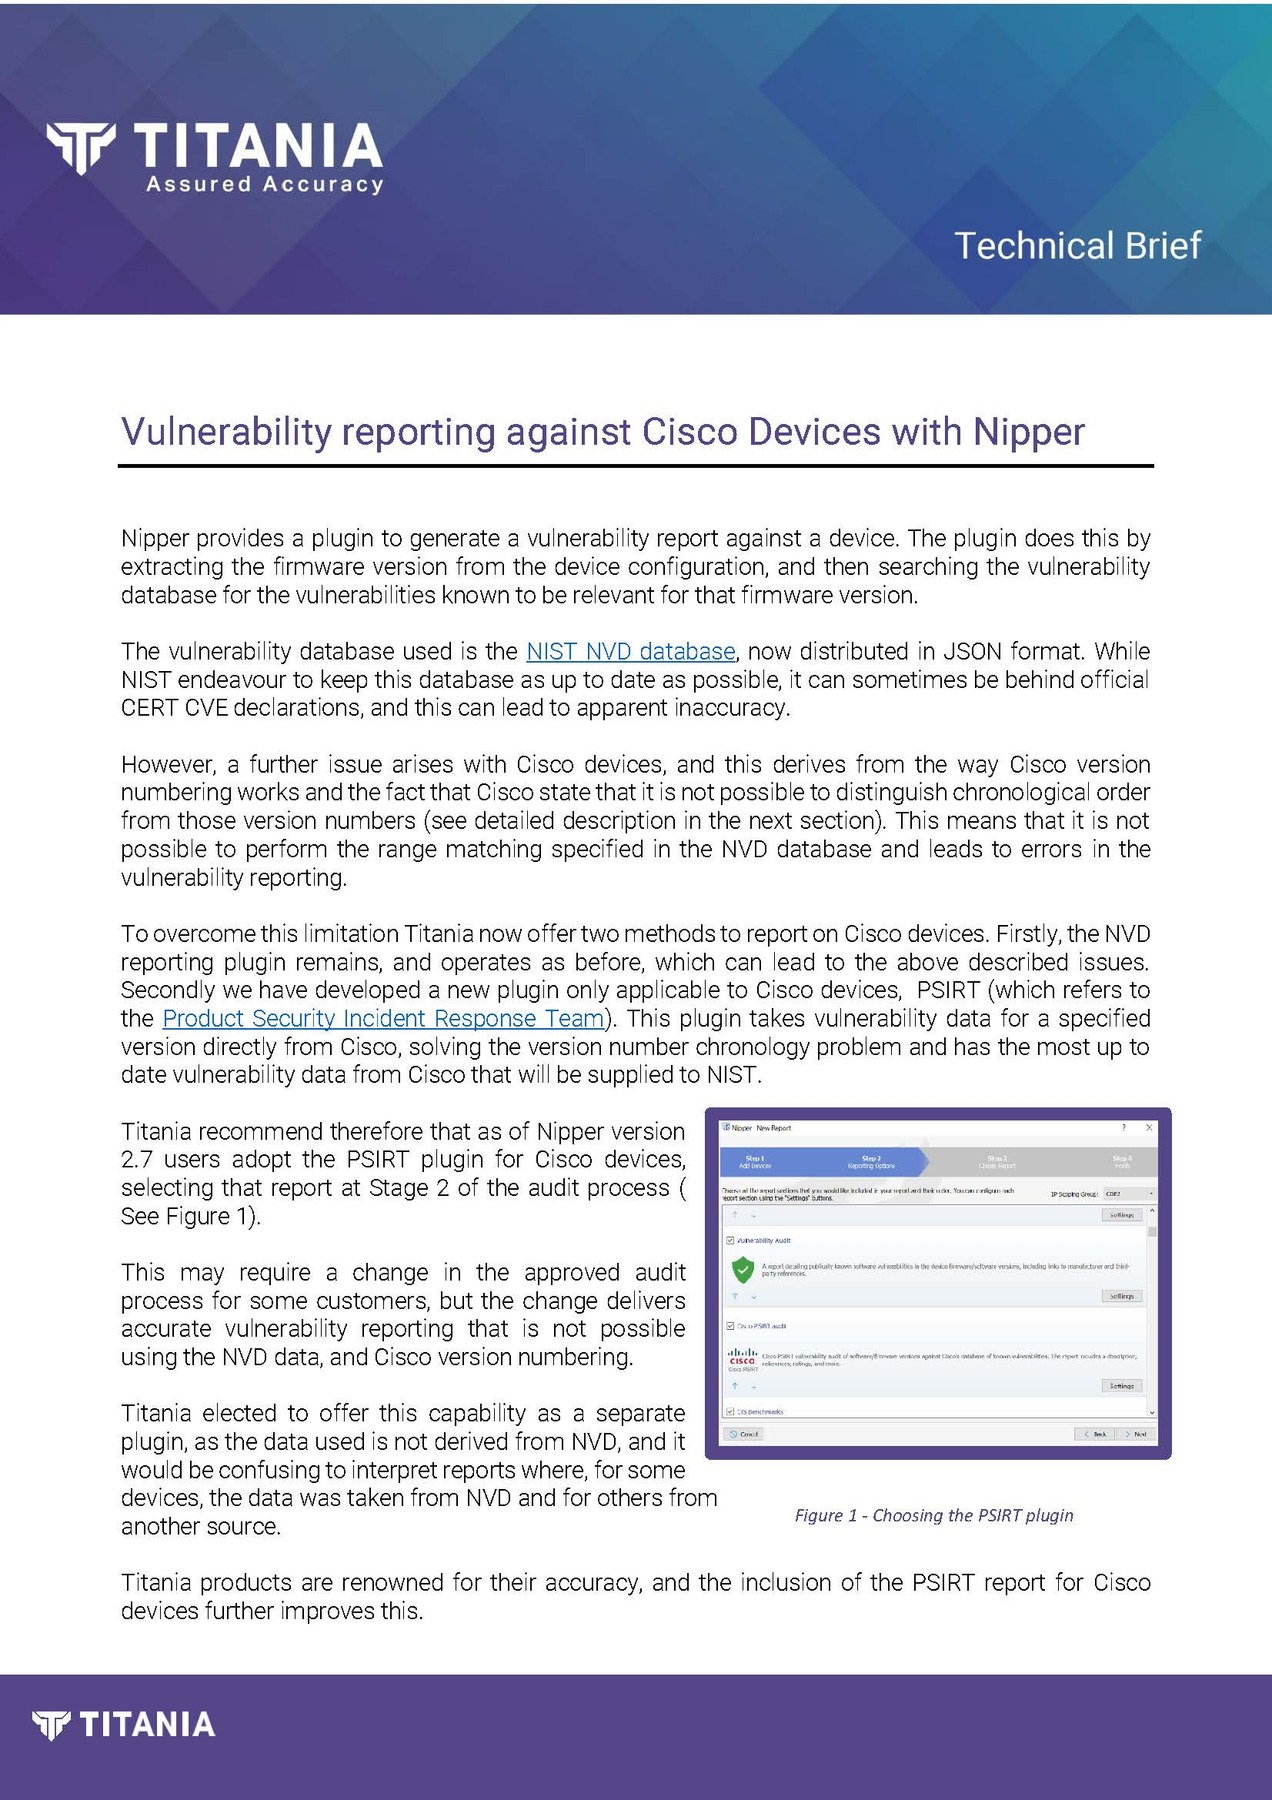 Vulnerability reporting against Cisco Devices with Nipper